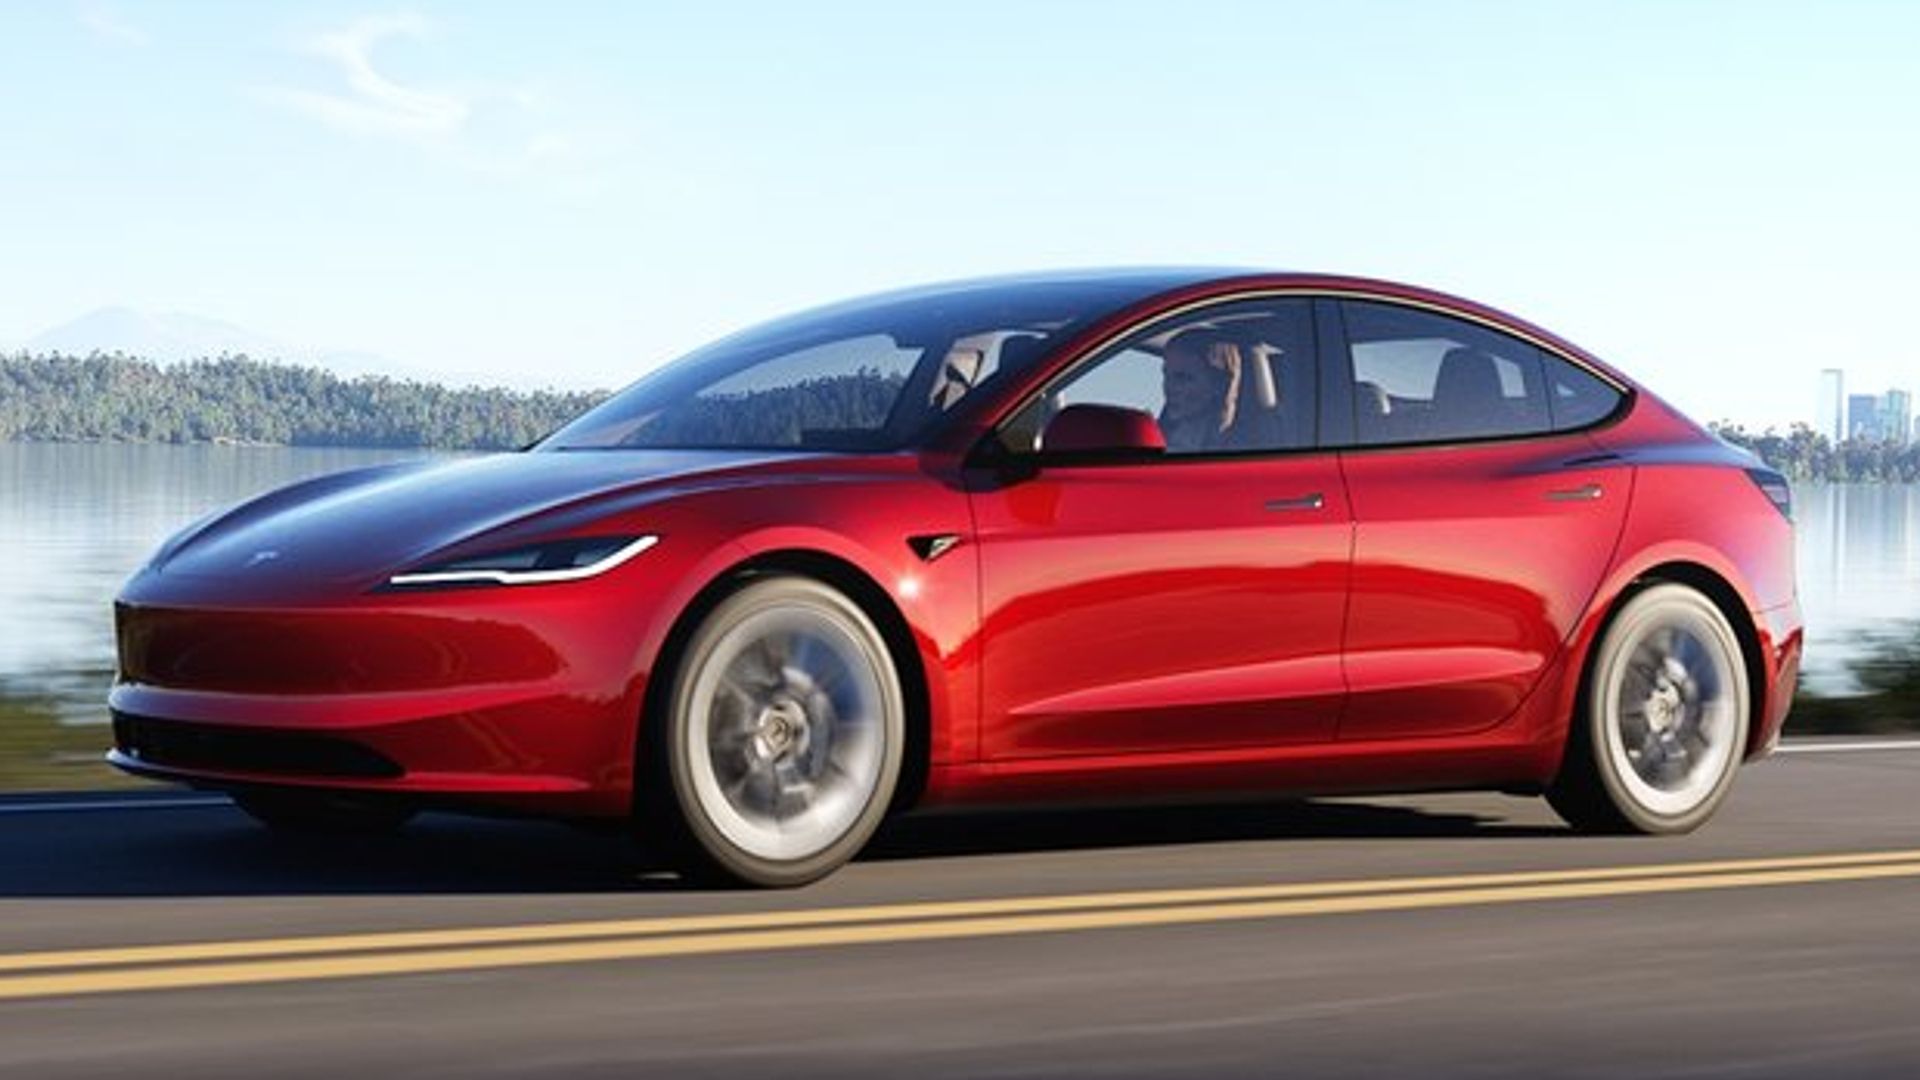 Tesla Model 3, Model Y lease buyout option may be possible, email